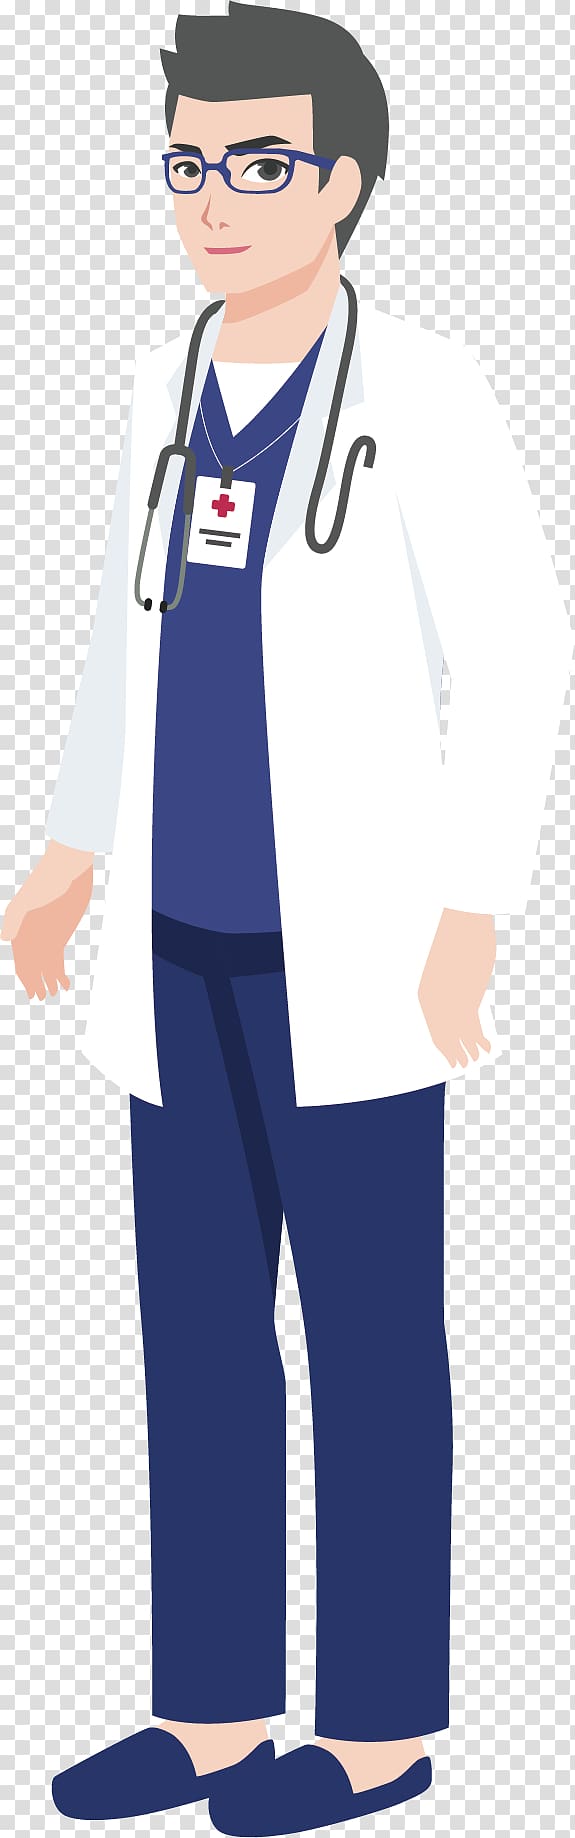 Cartoon Physician Illustration, Original Chinese doctor transparent background PNG clipart